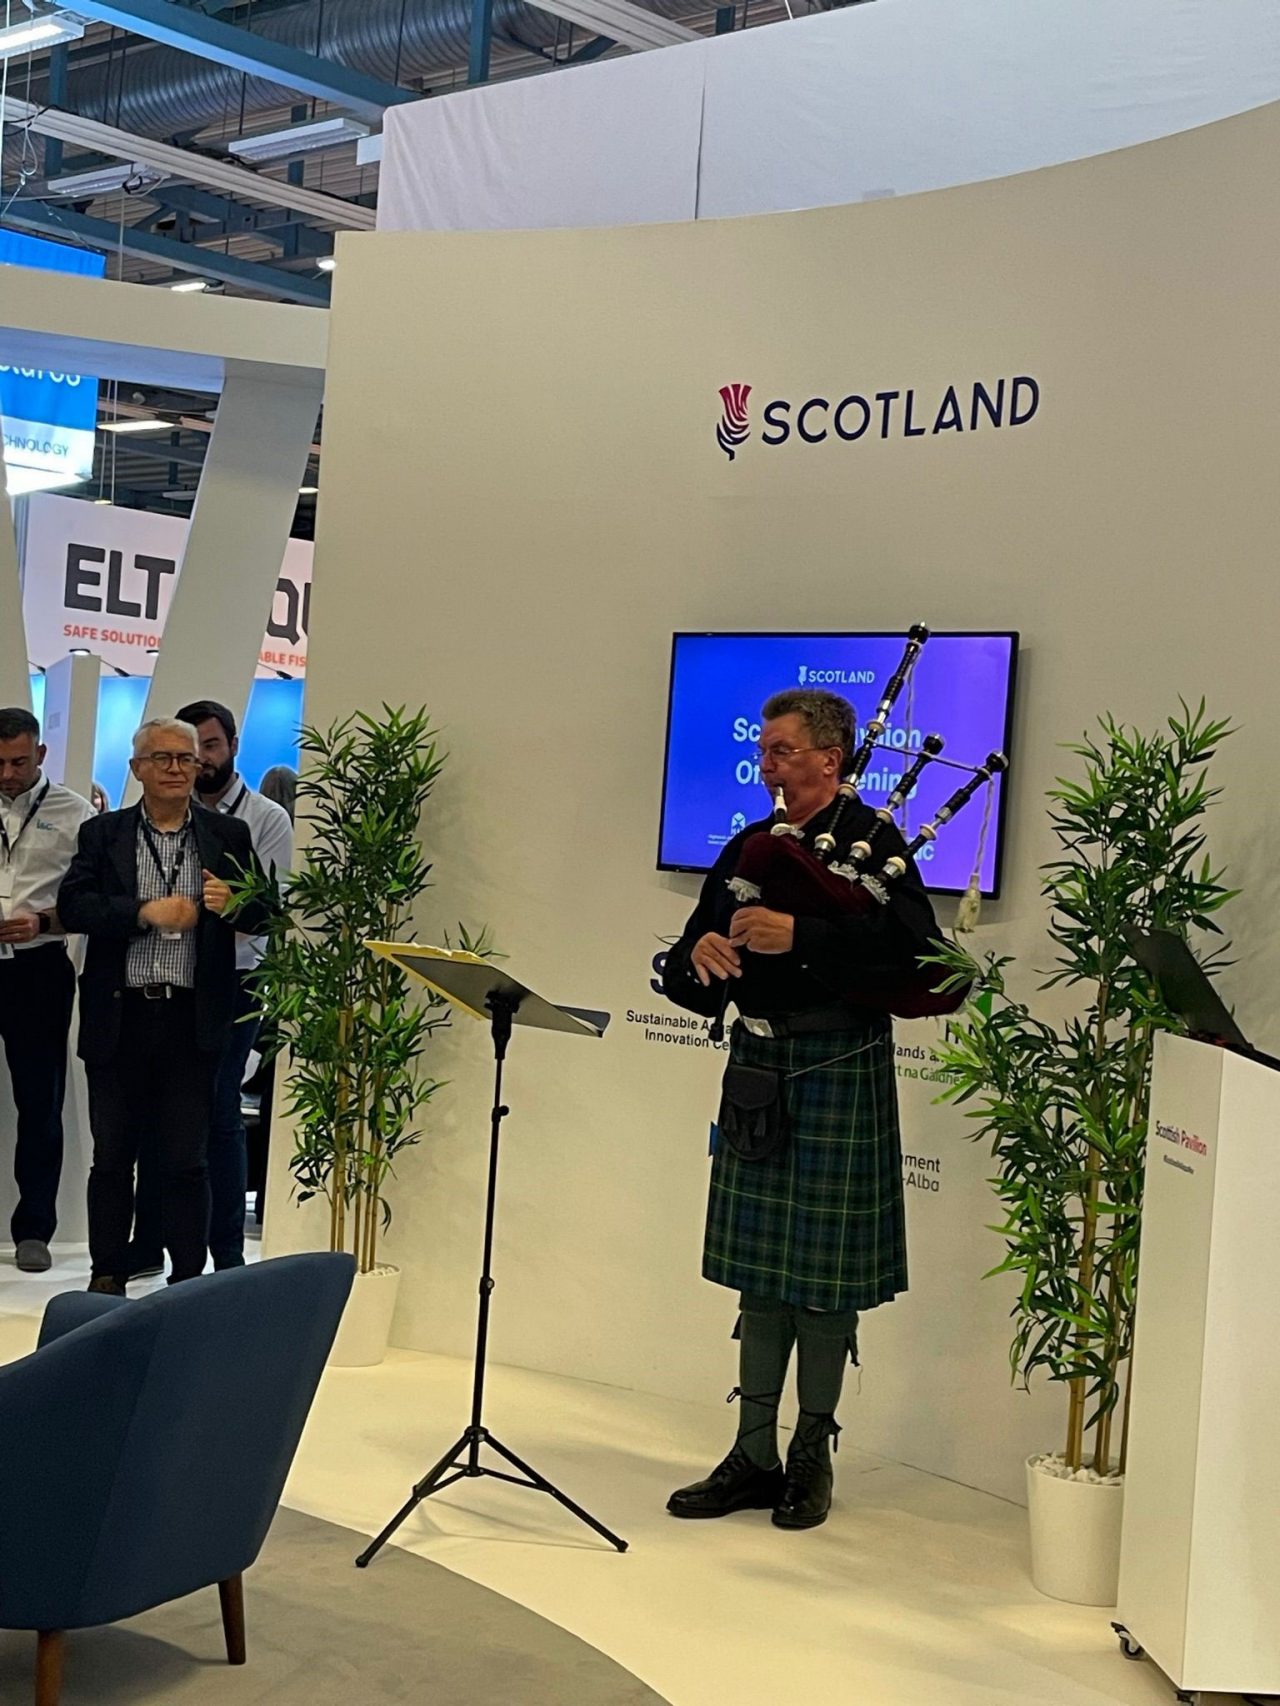 Scottish bagpiper during the opening ceremony at the Scottish Pavilion at Aqua Nor 2023